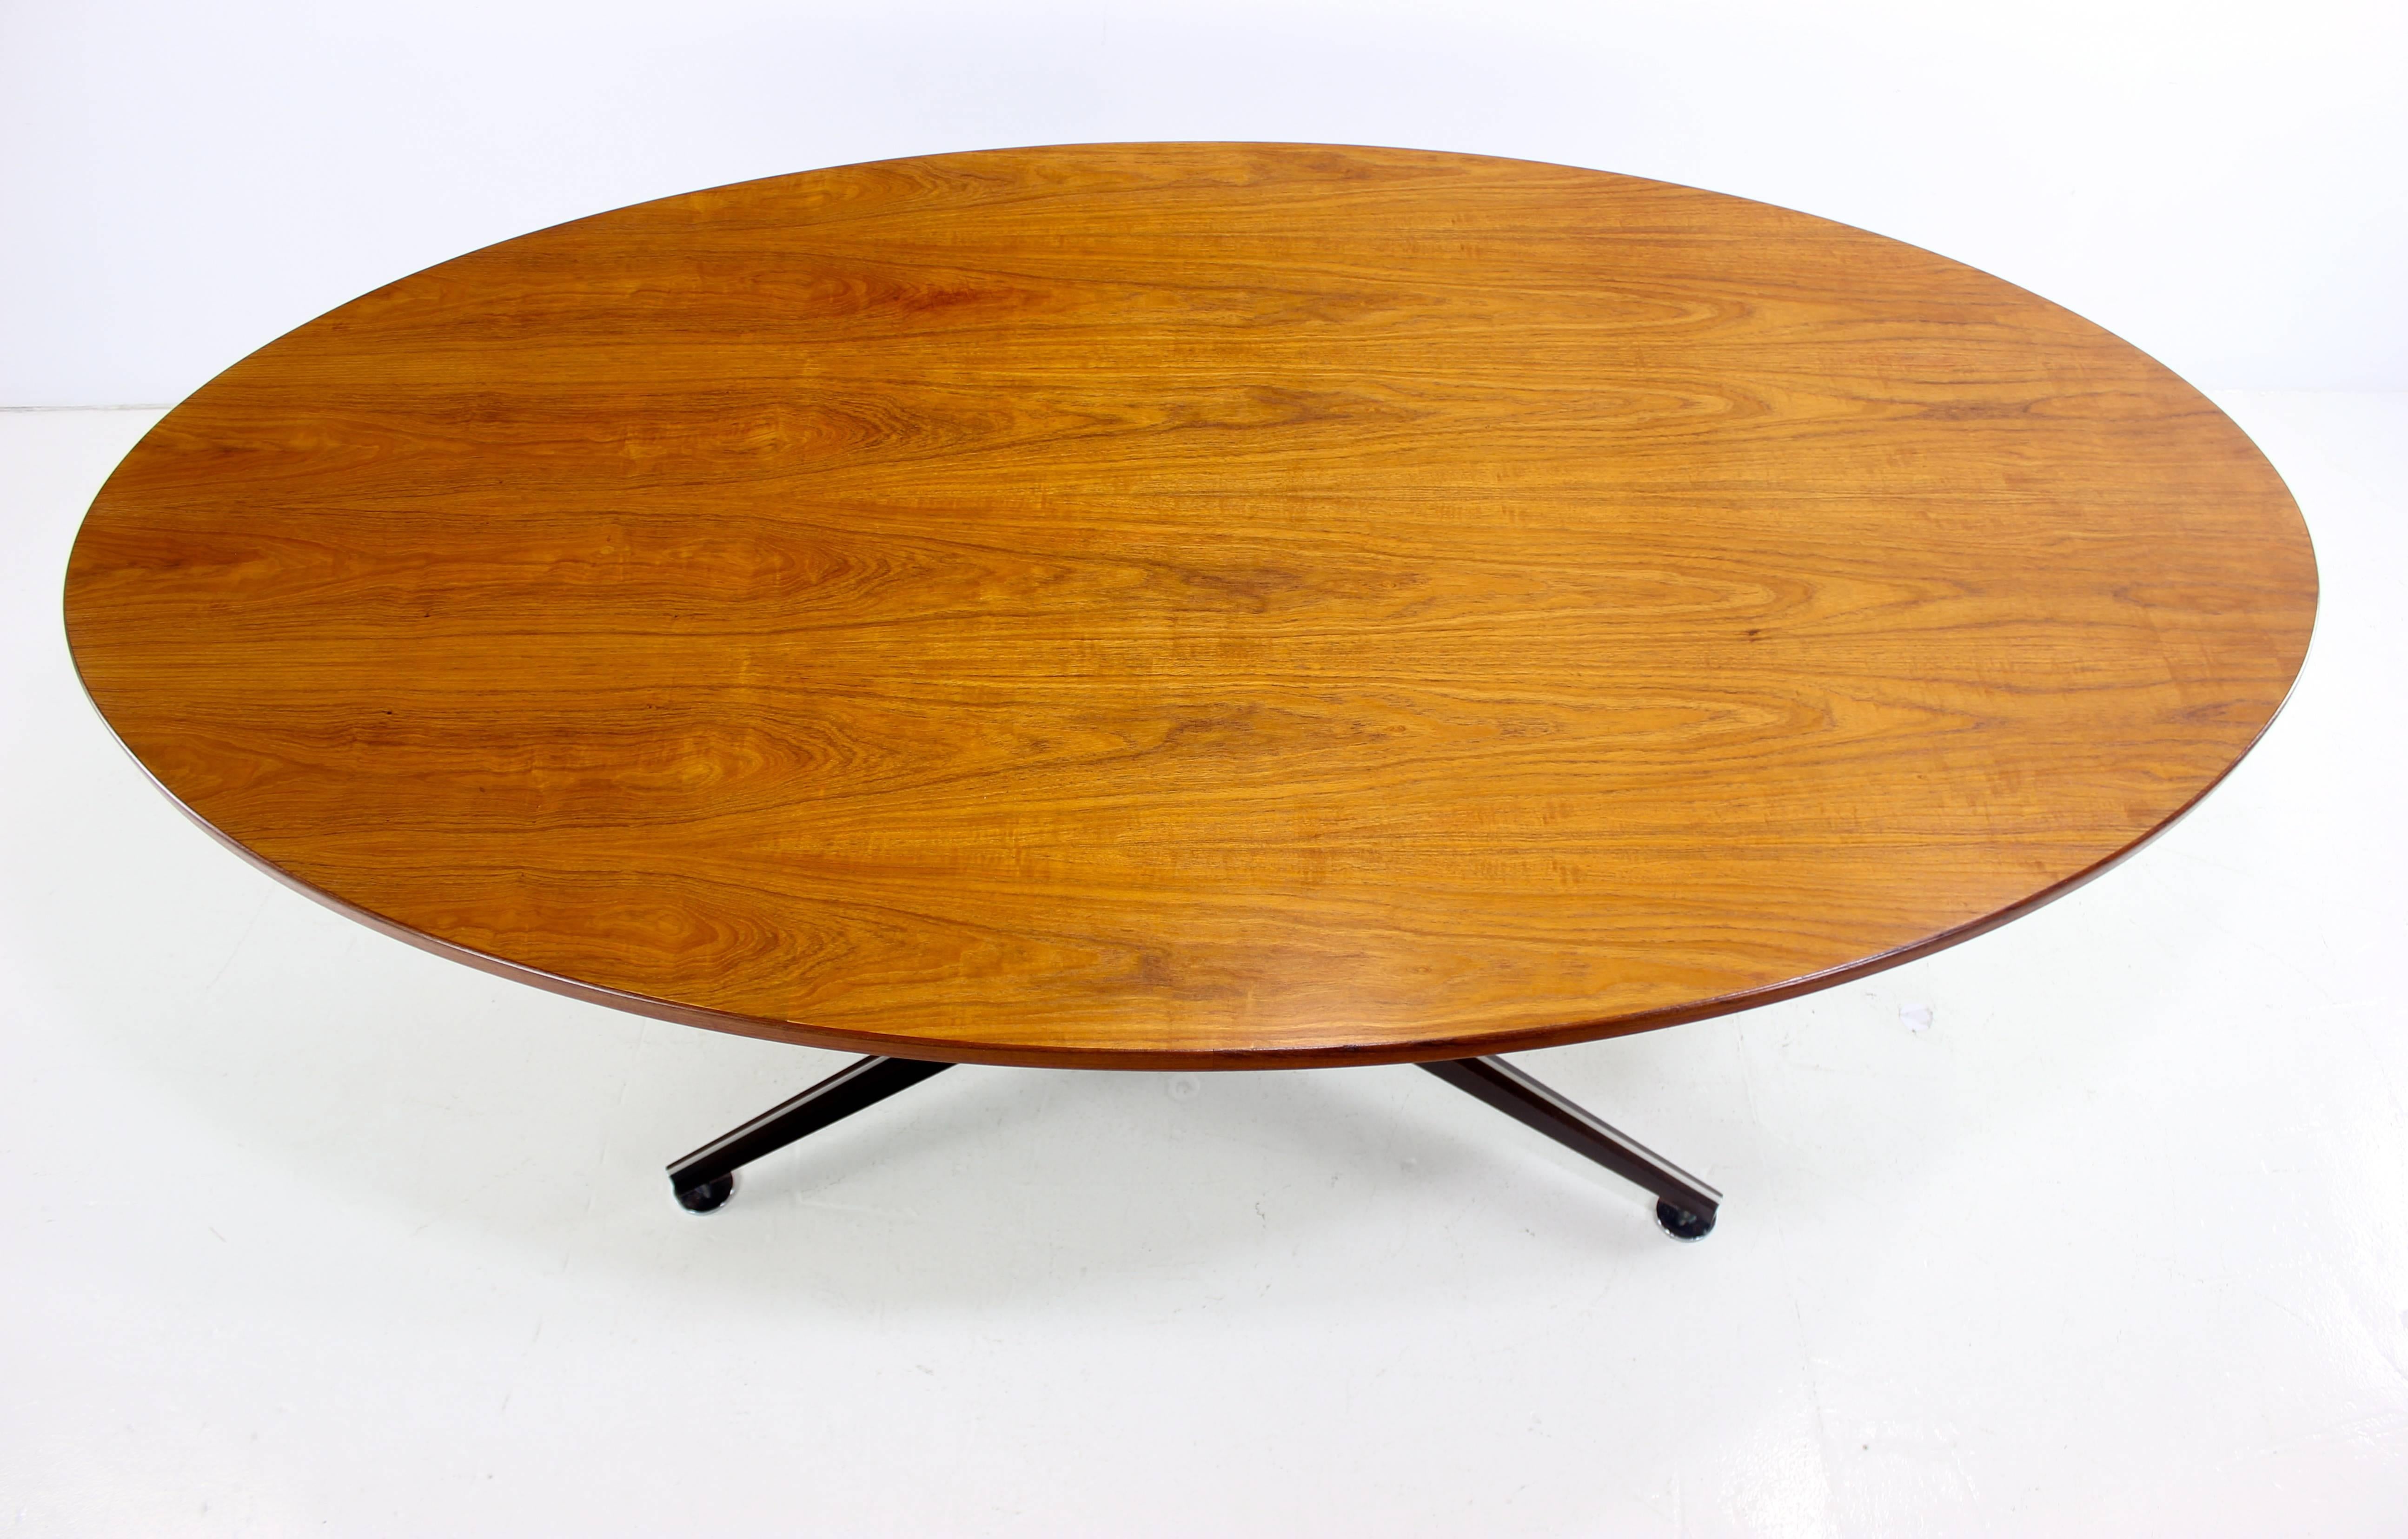 American Mid-Century Modern Teak Dining Table by Edward Wormley for Dunbar For Sale